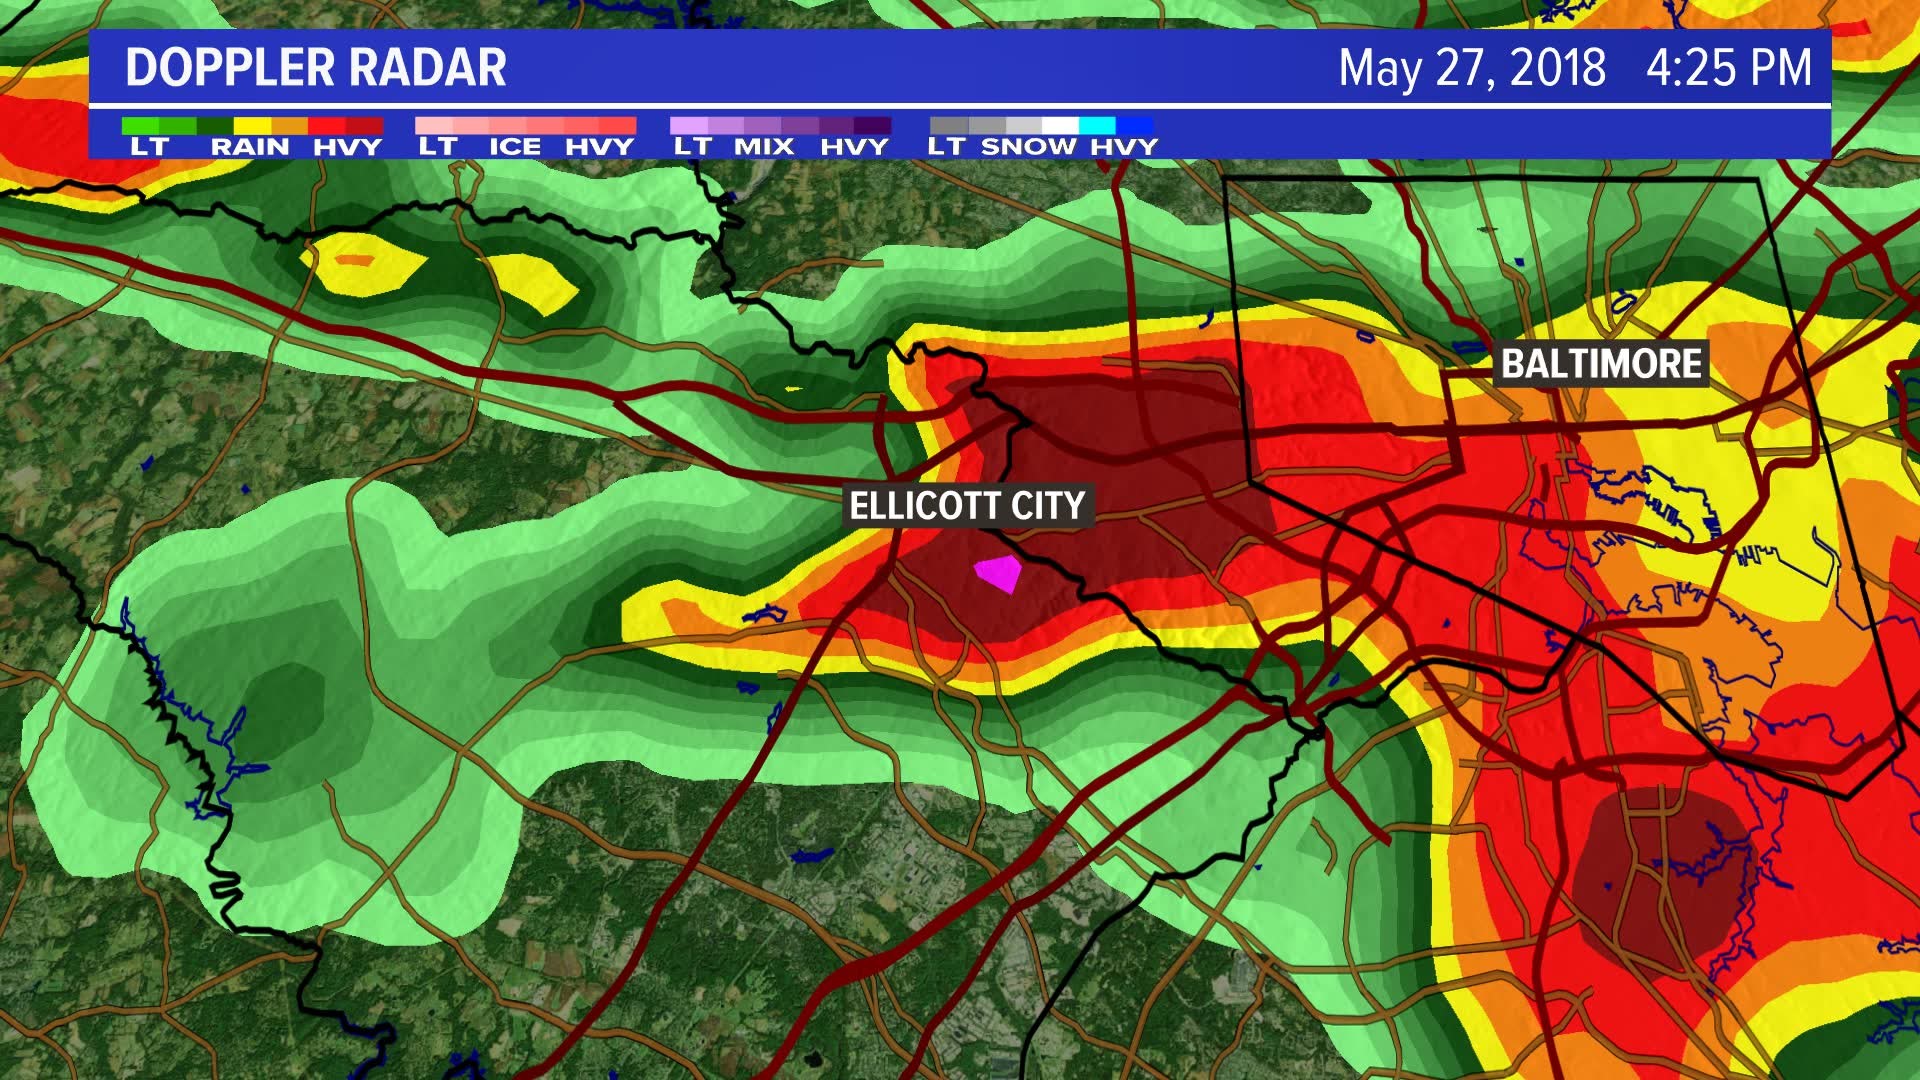 Here's a look at the weather radar of Ellicott City, Md. on Sunday when the city was hit with dangerous floodwaters. 